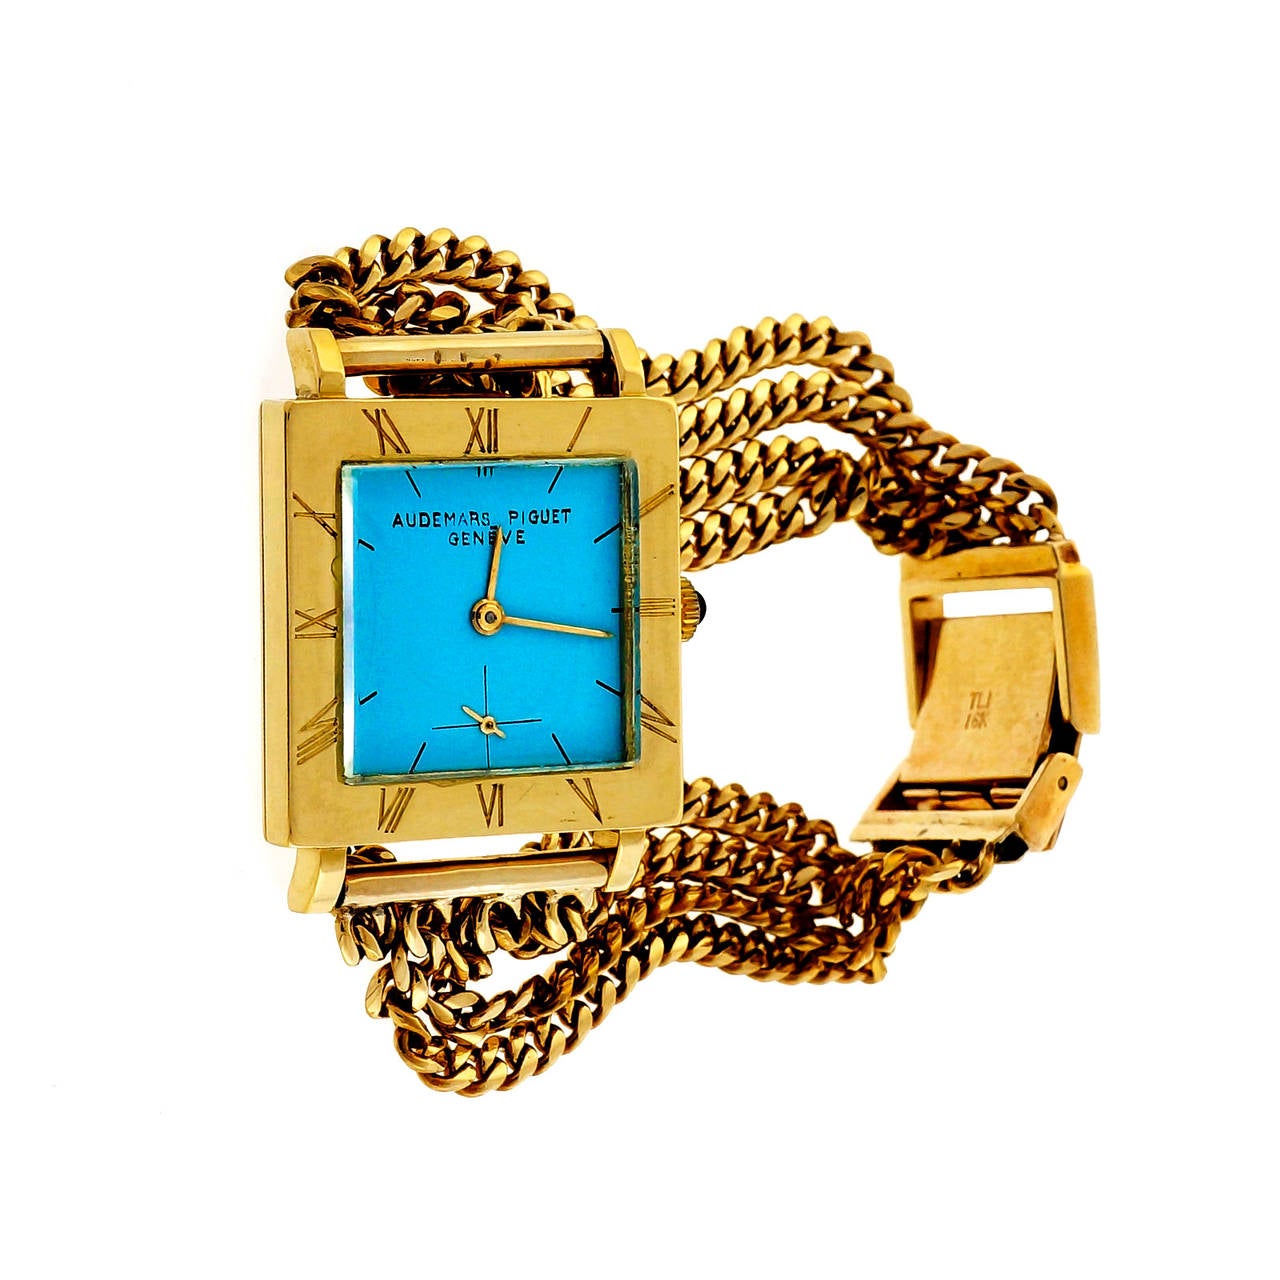 Audemars Piguet Lady's Yellow Gold Wristwatch with Refinished Custom-Colored Robins Egg Blue DialDial circa 1960s.Beuatiful fashion watch,Original 1960s  AUDEMARS Piquet case and movement,refinishes Piquet Dial.Solid Gold 4 row 18k later watch